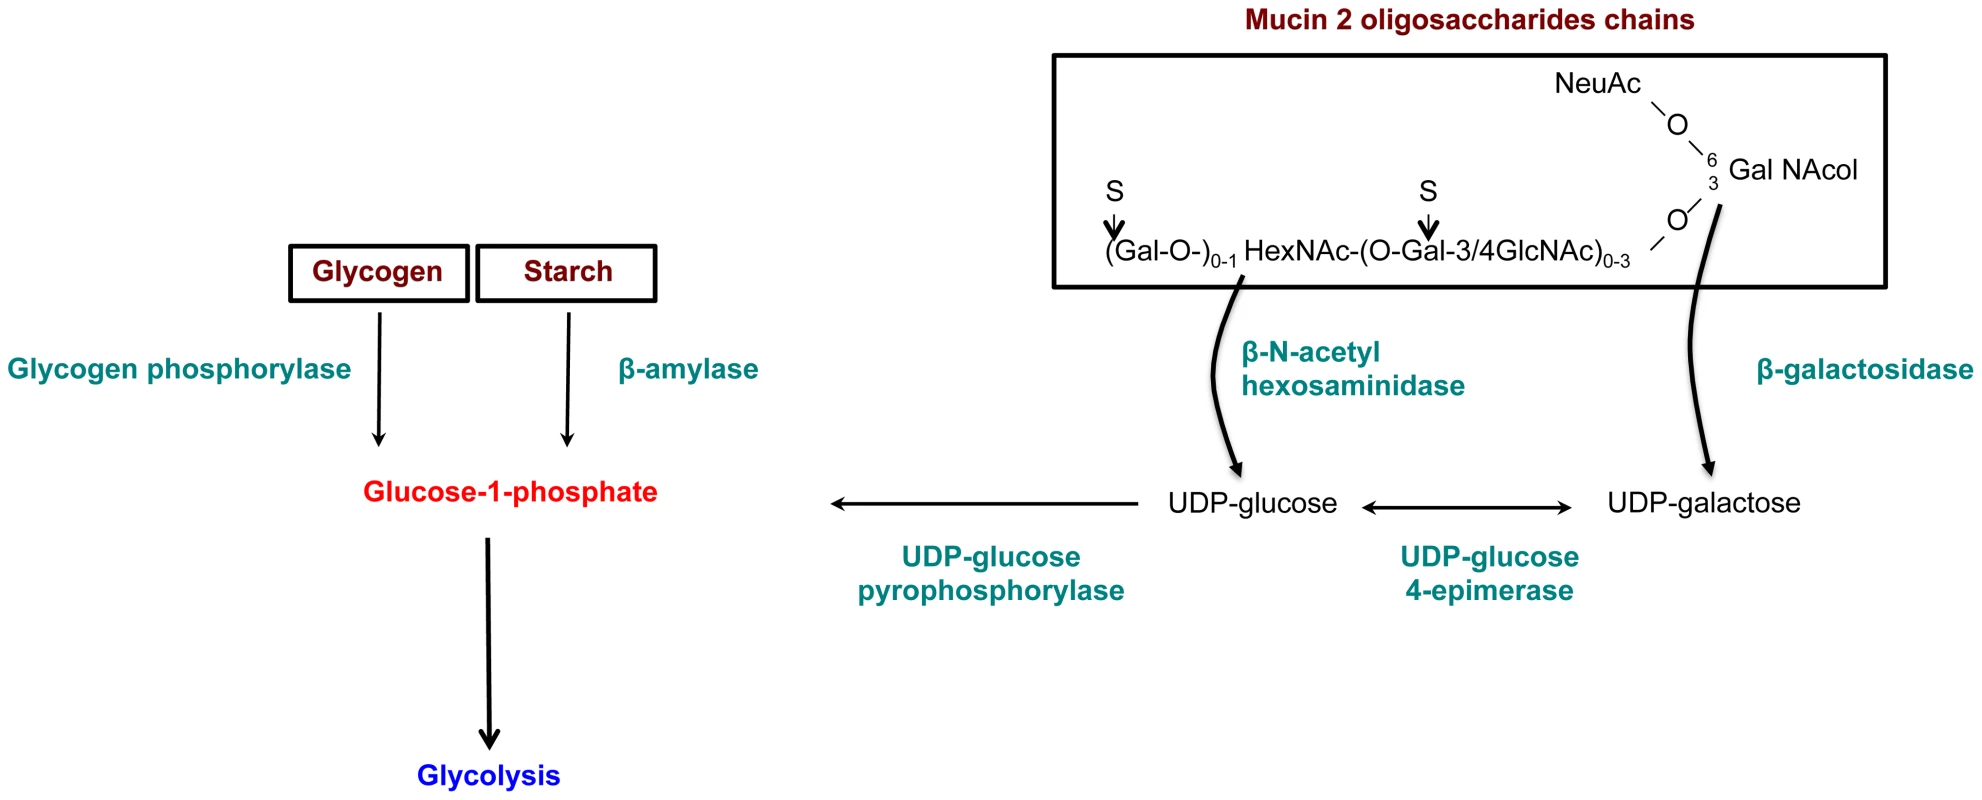 Enzymes overexpressed and involved in carbohydrate metabolism specific to the virulent HM1:IMSS strain.